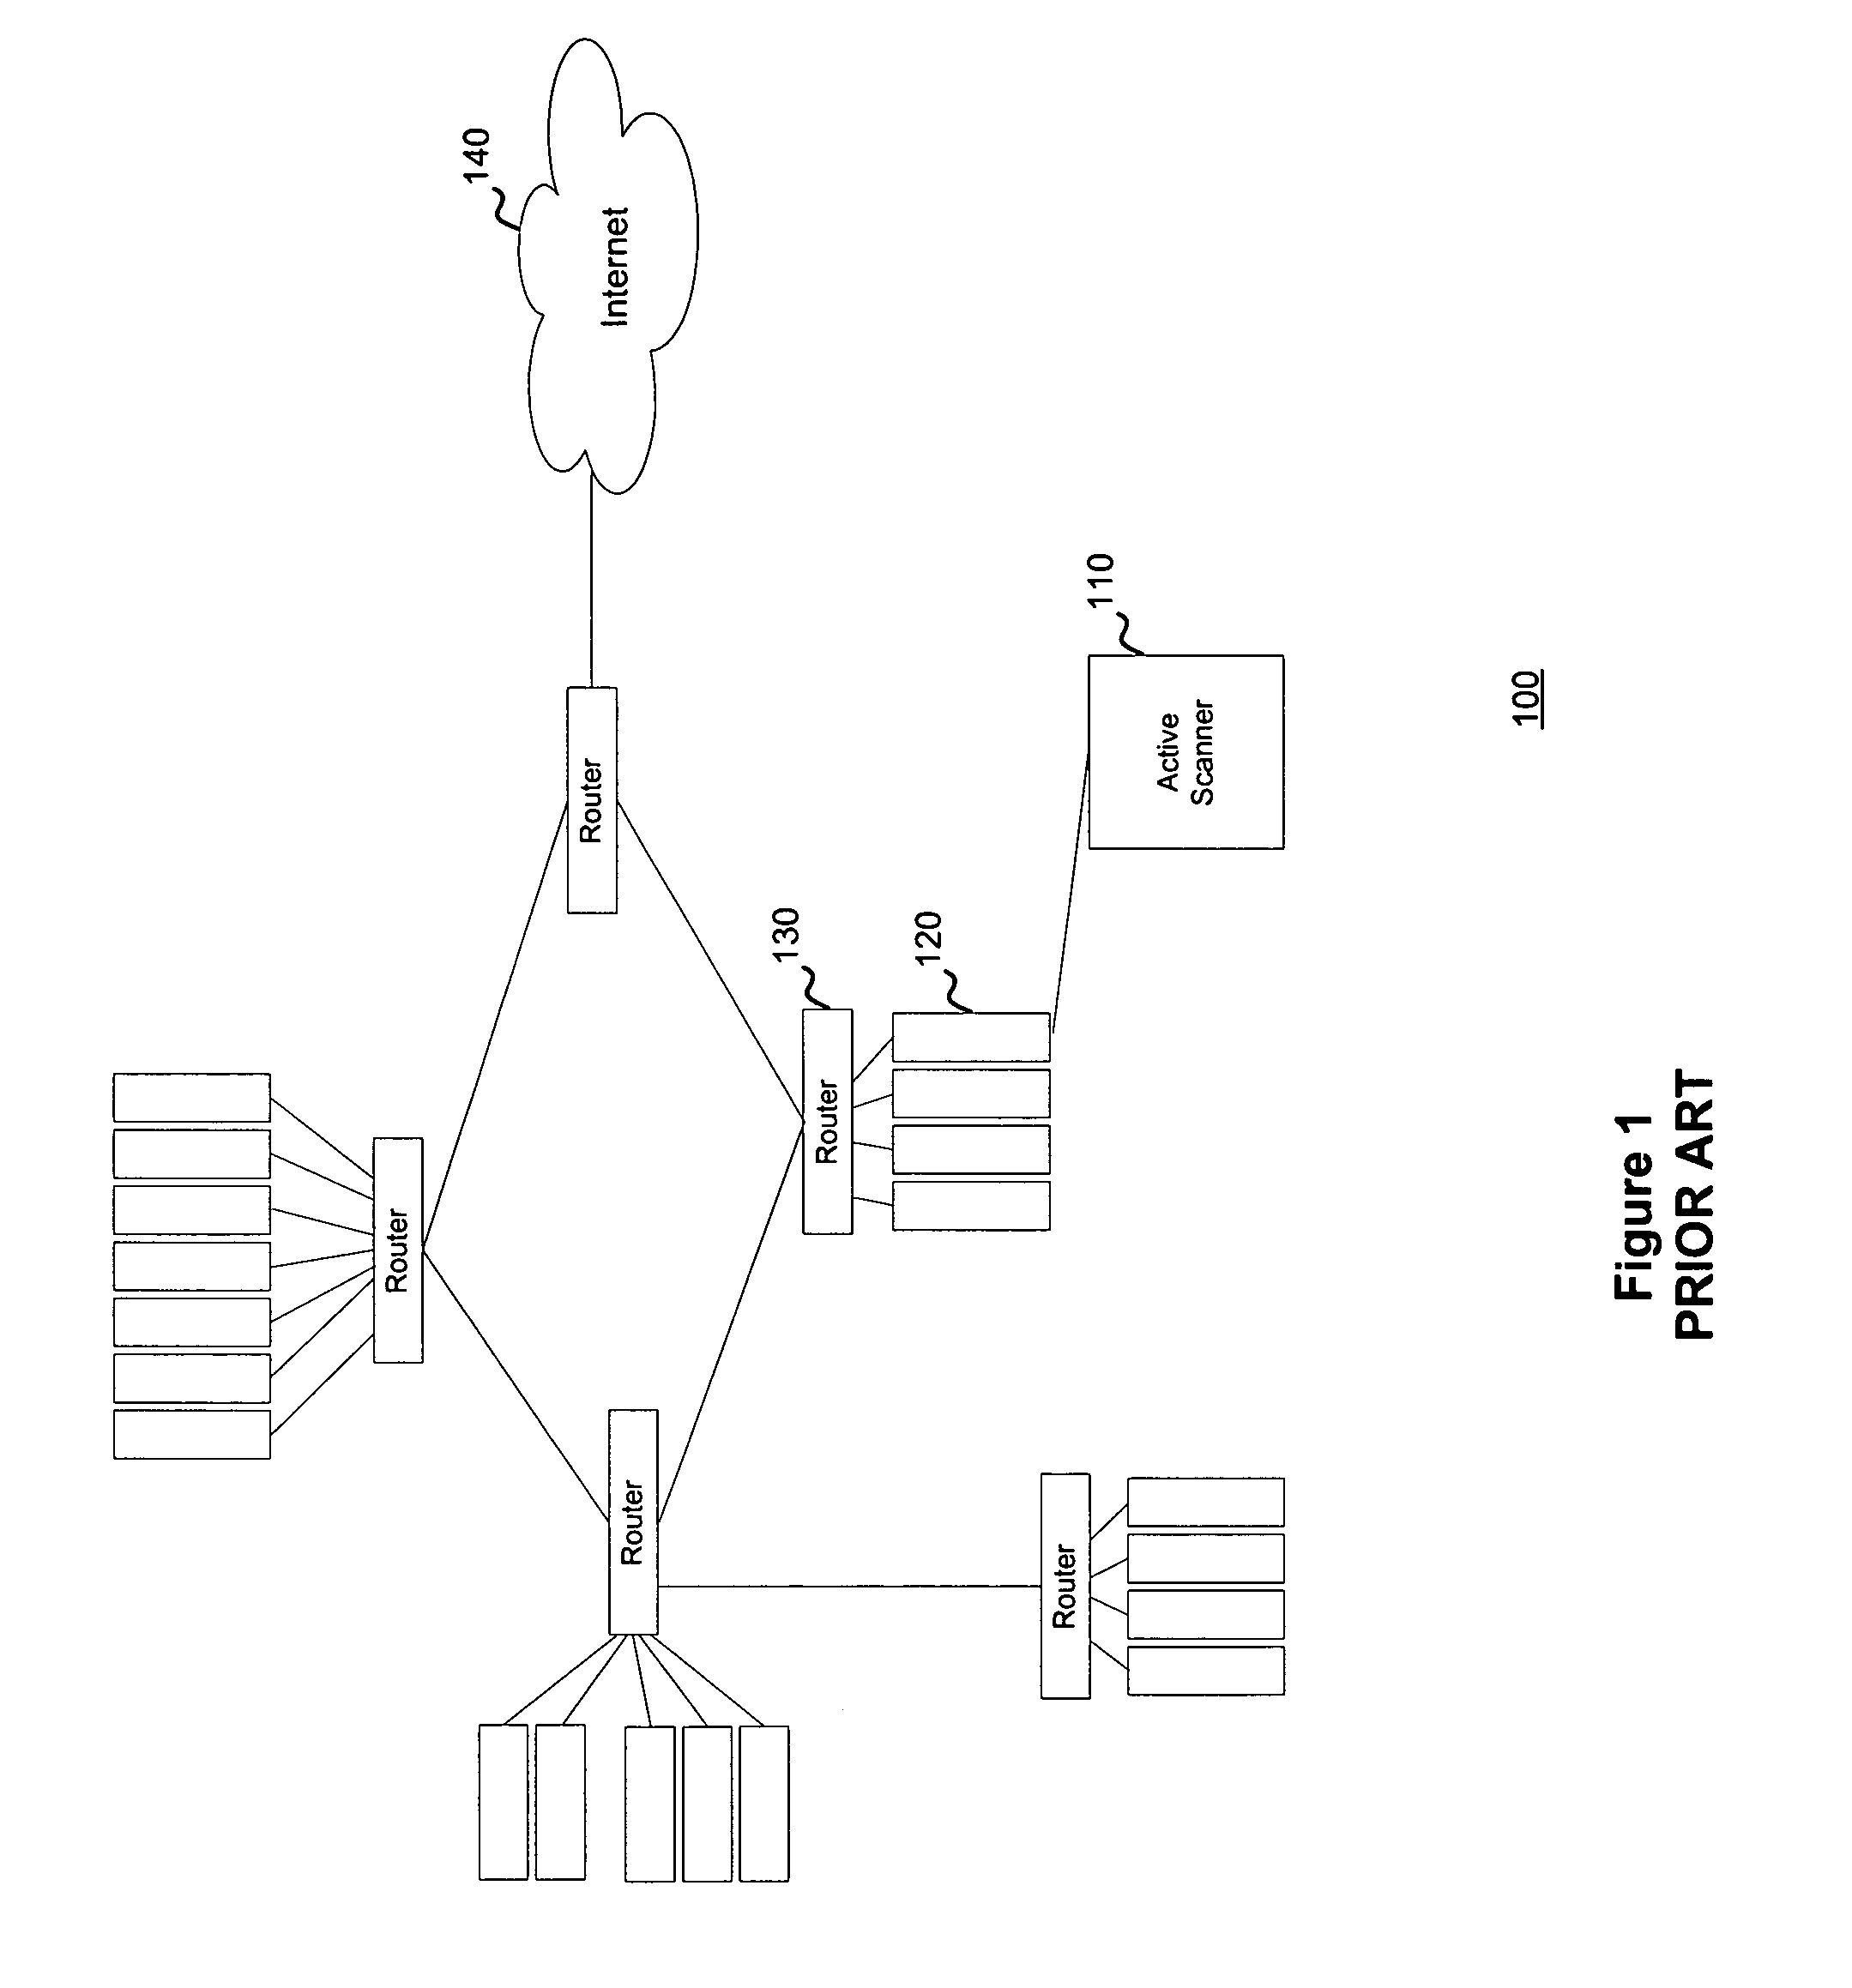 System and method for managing network vulnerability analysis systems